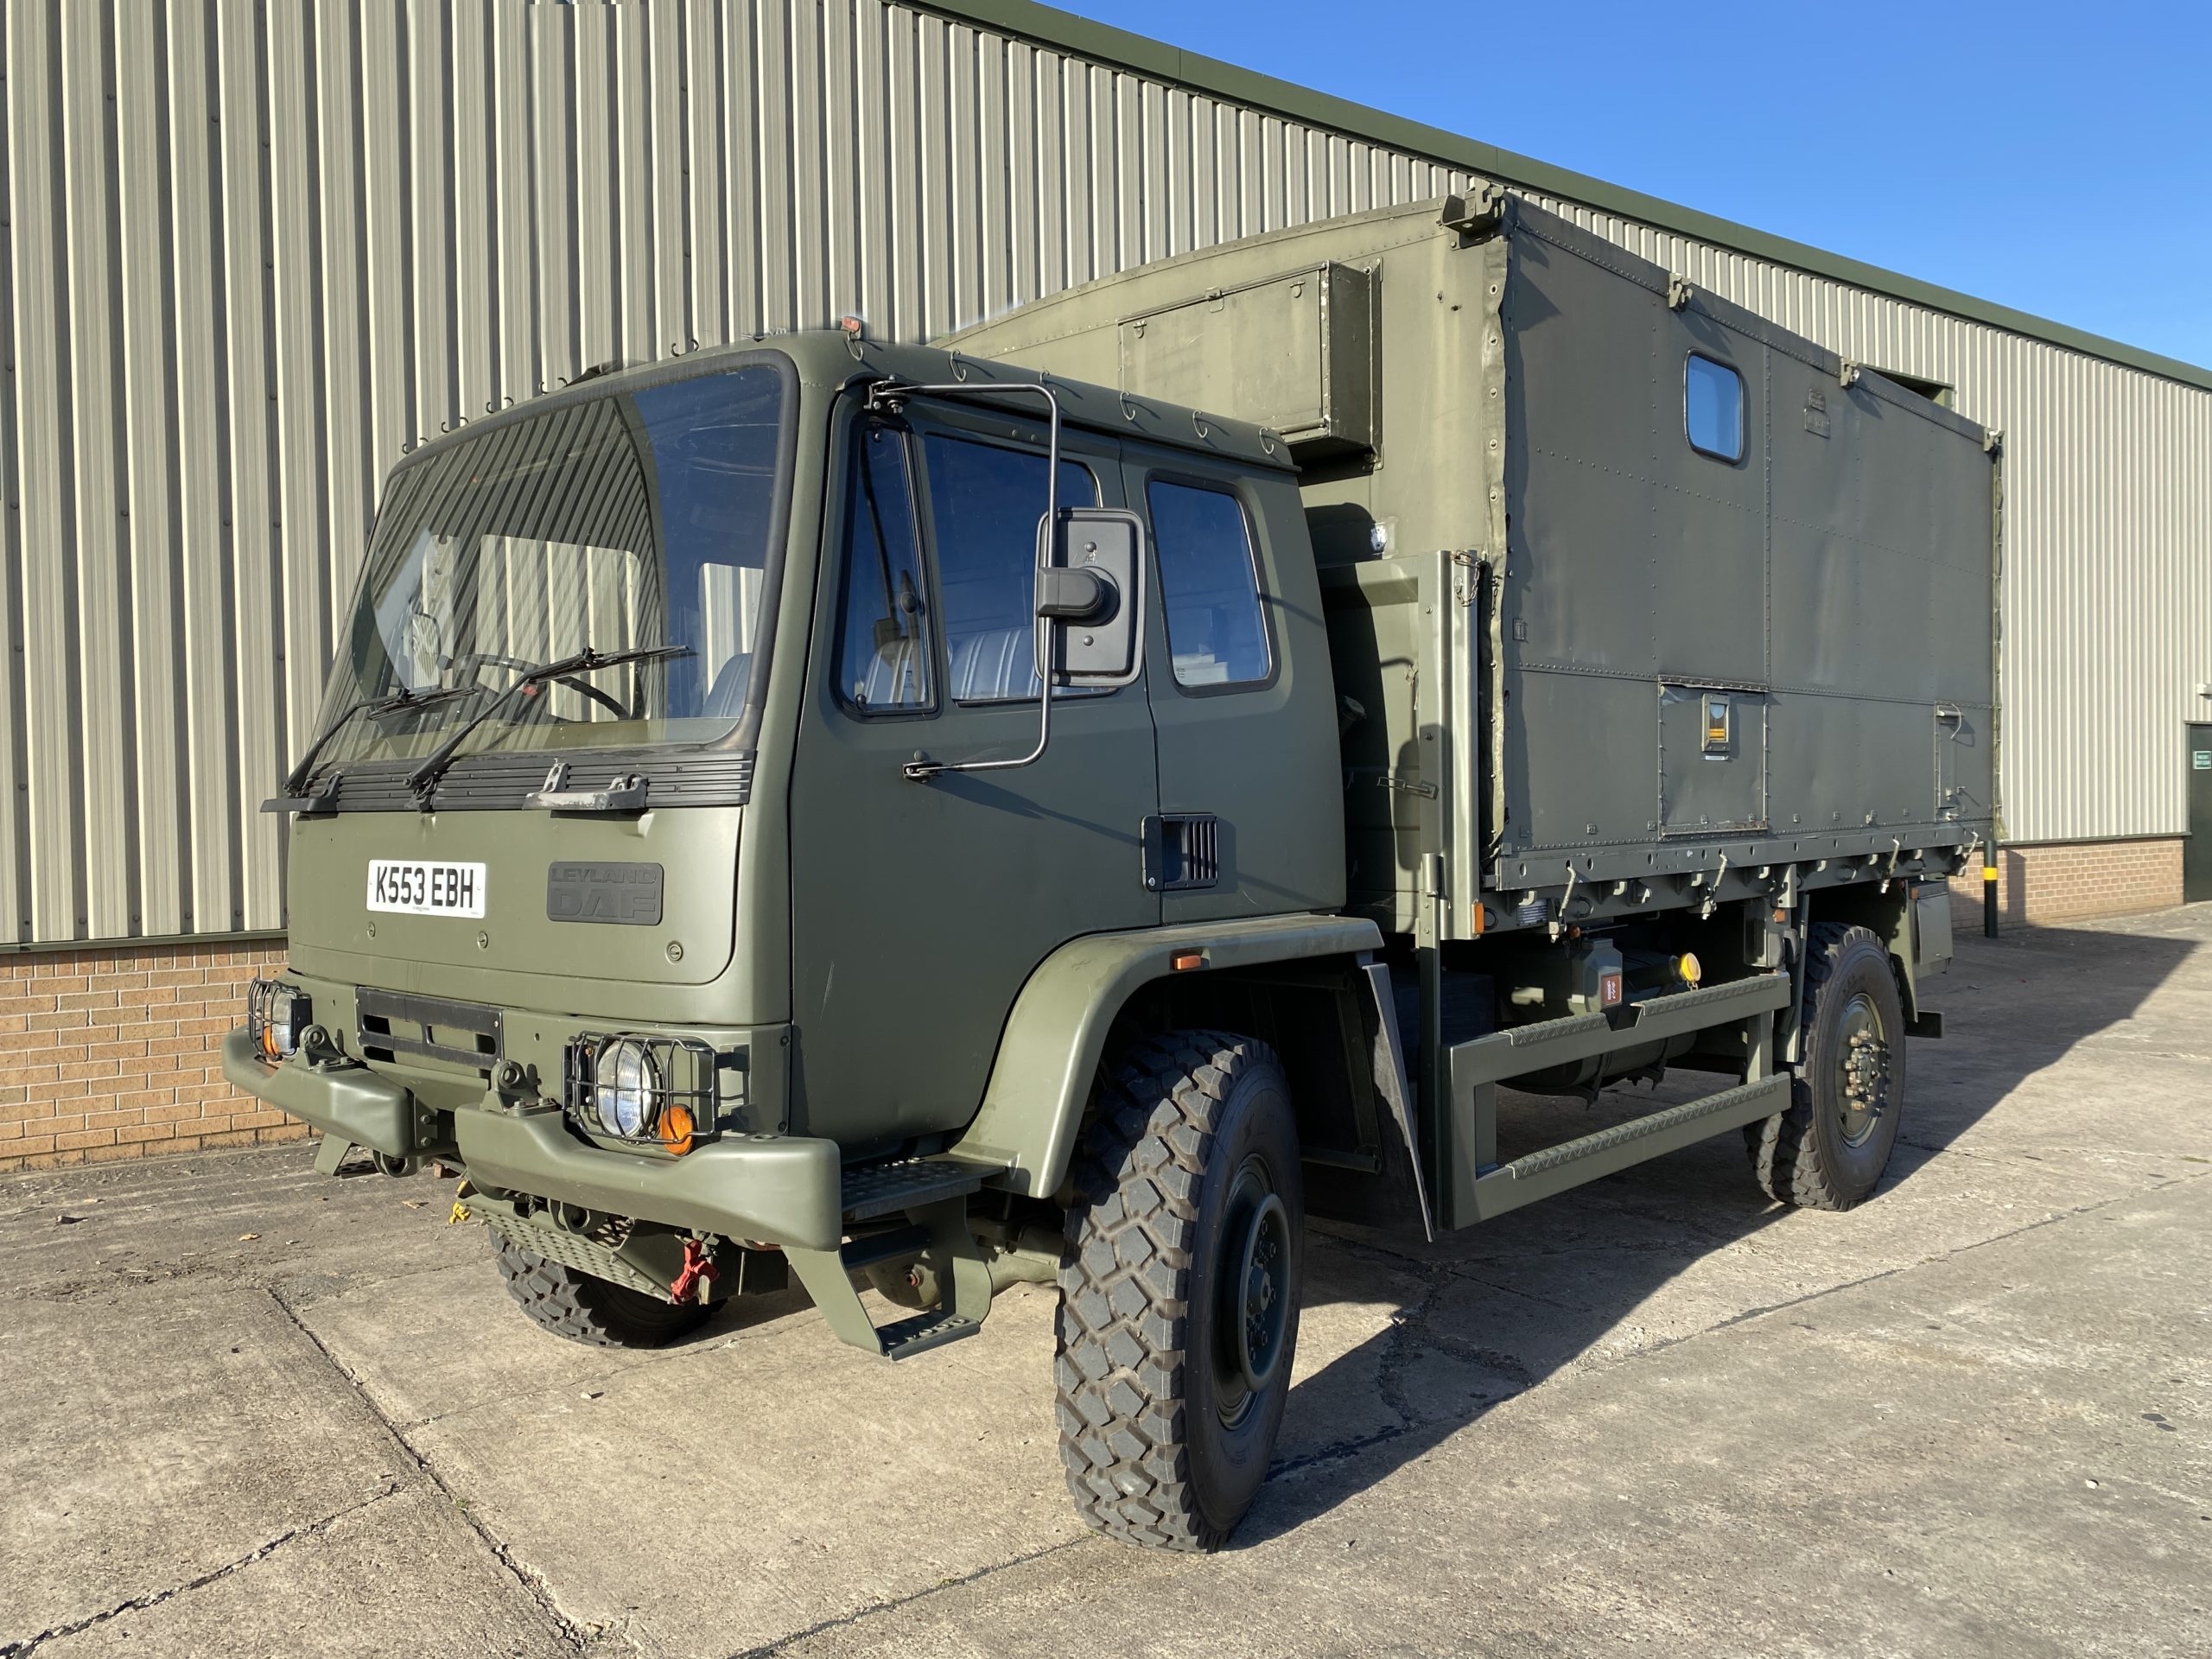 Leyland Daf 4x4 Box Truck Road Registered - Govsales of mod surplus ex army trucks, ex army land rovers and other military vehicles for sale